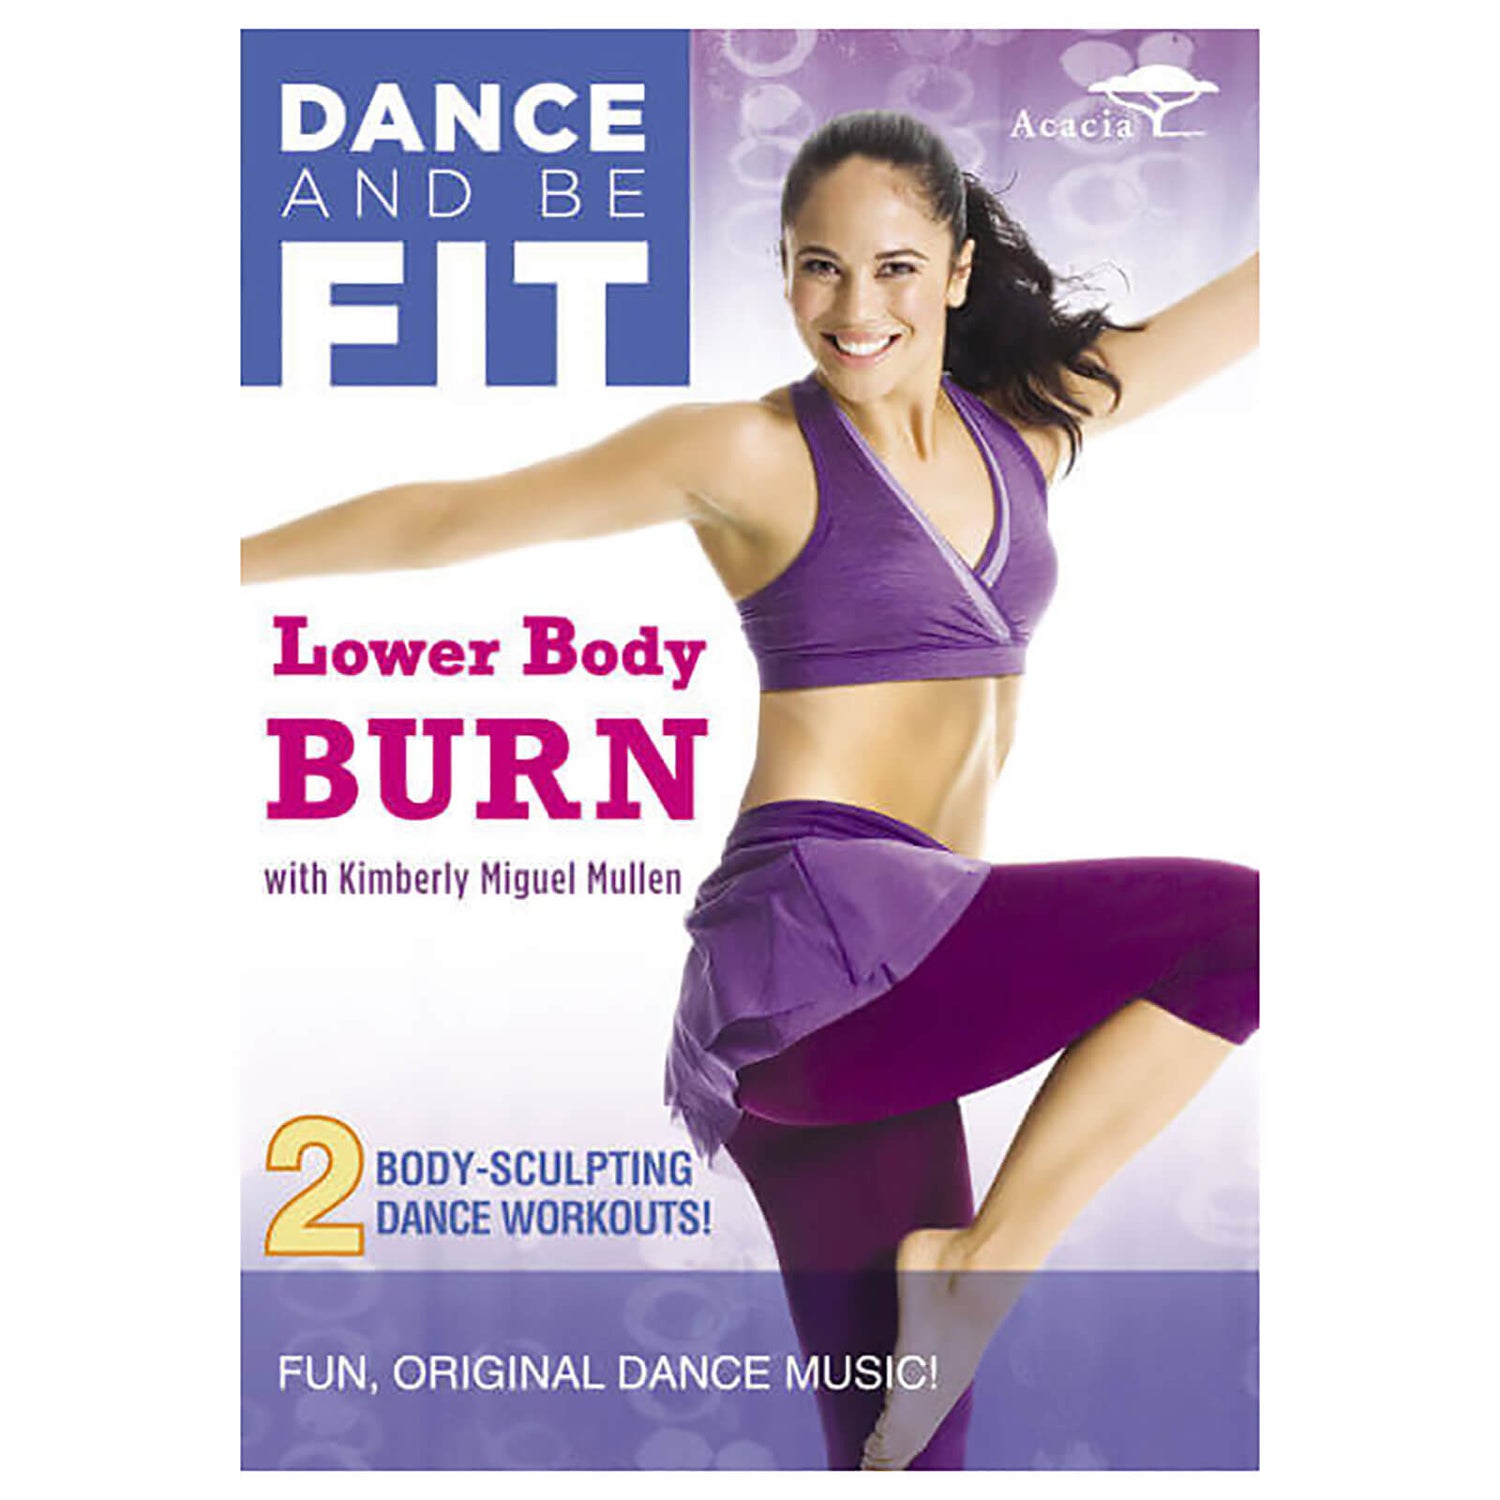 Dance and be Fit: Lower Body Burn